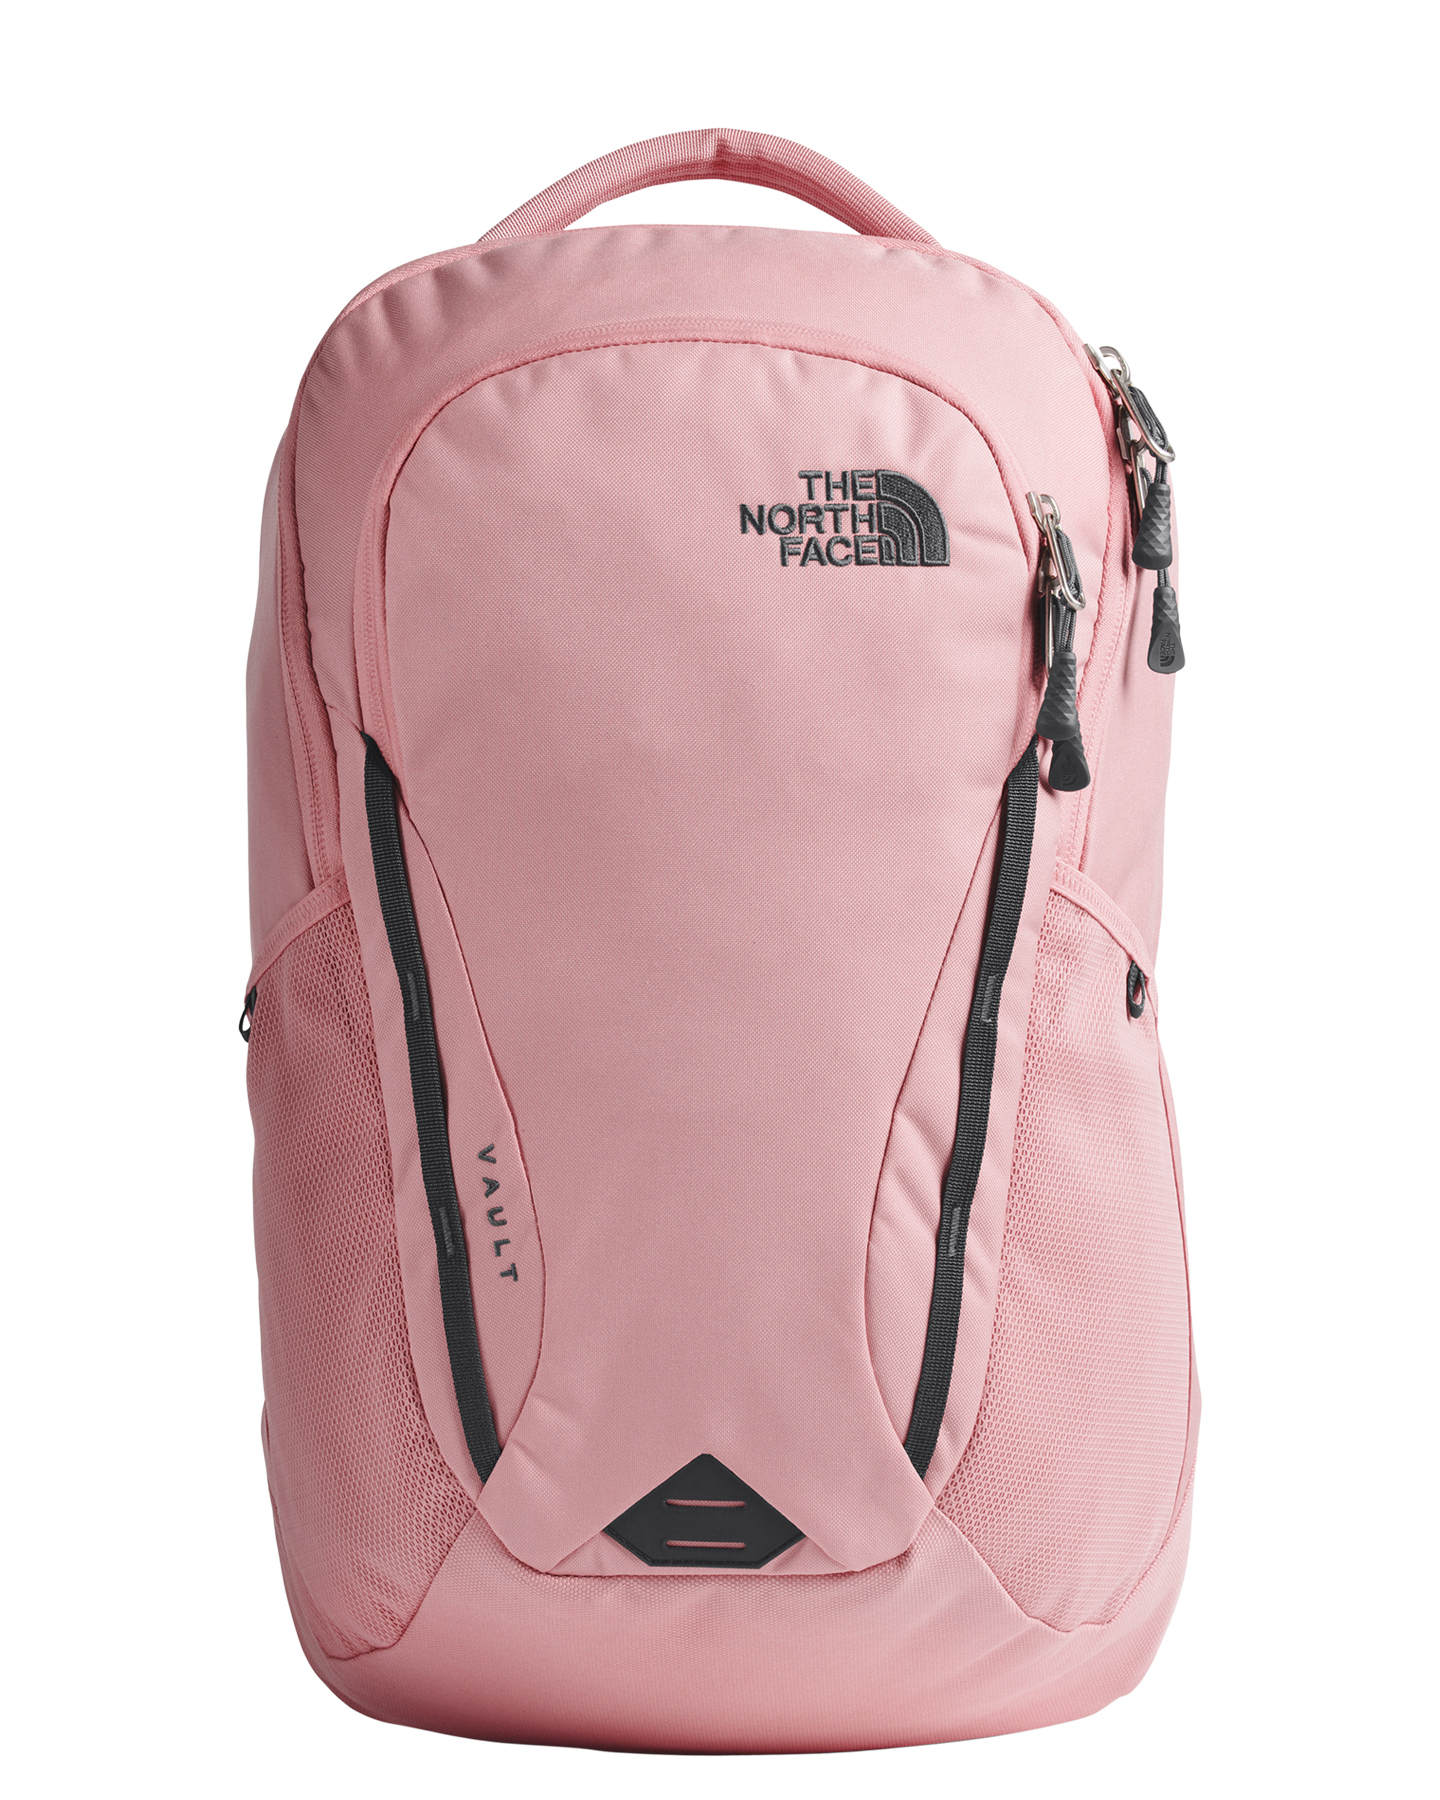 The North Face Womens Vault 26L Backpack - Mauveglow | SurfStitch